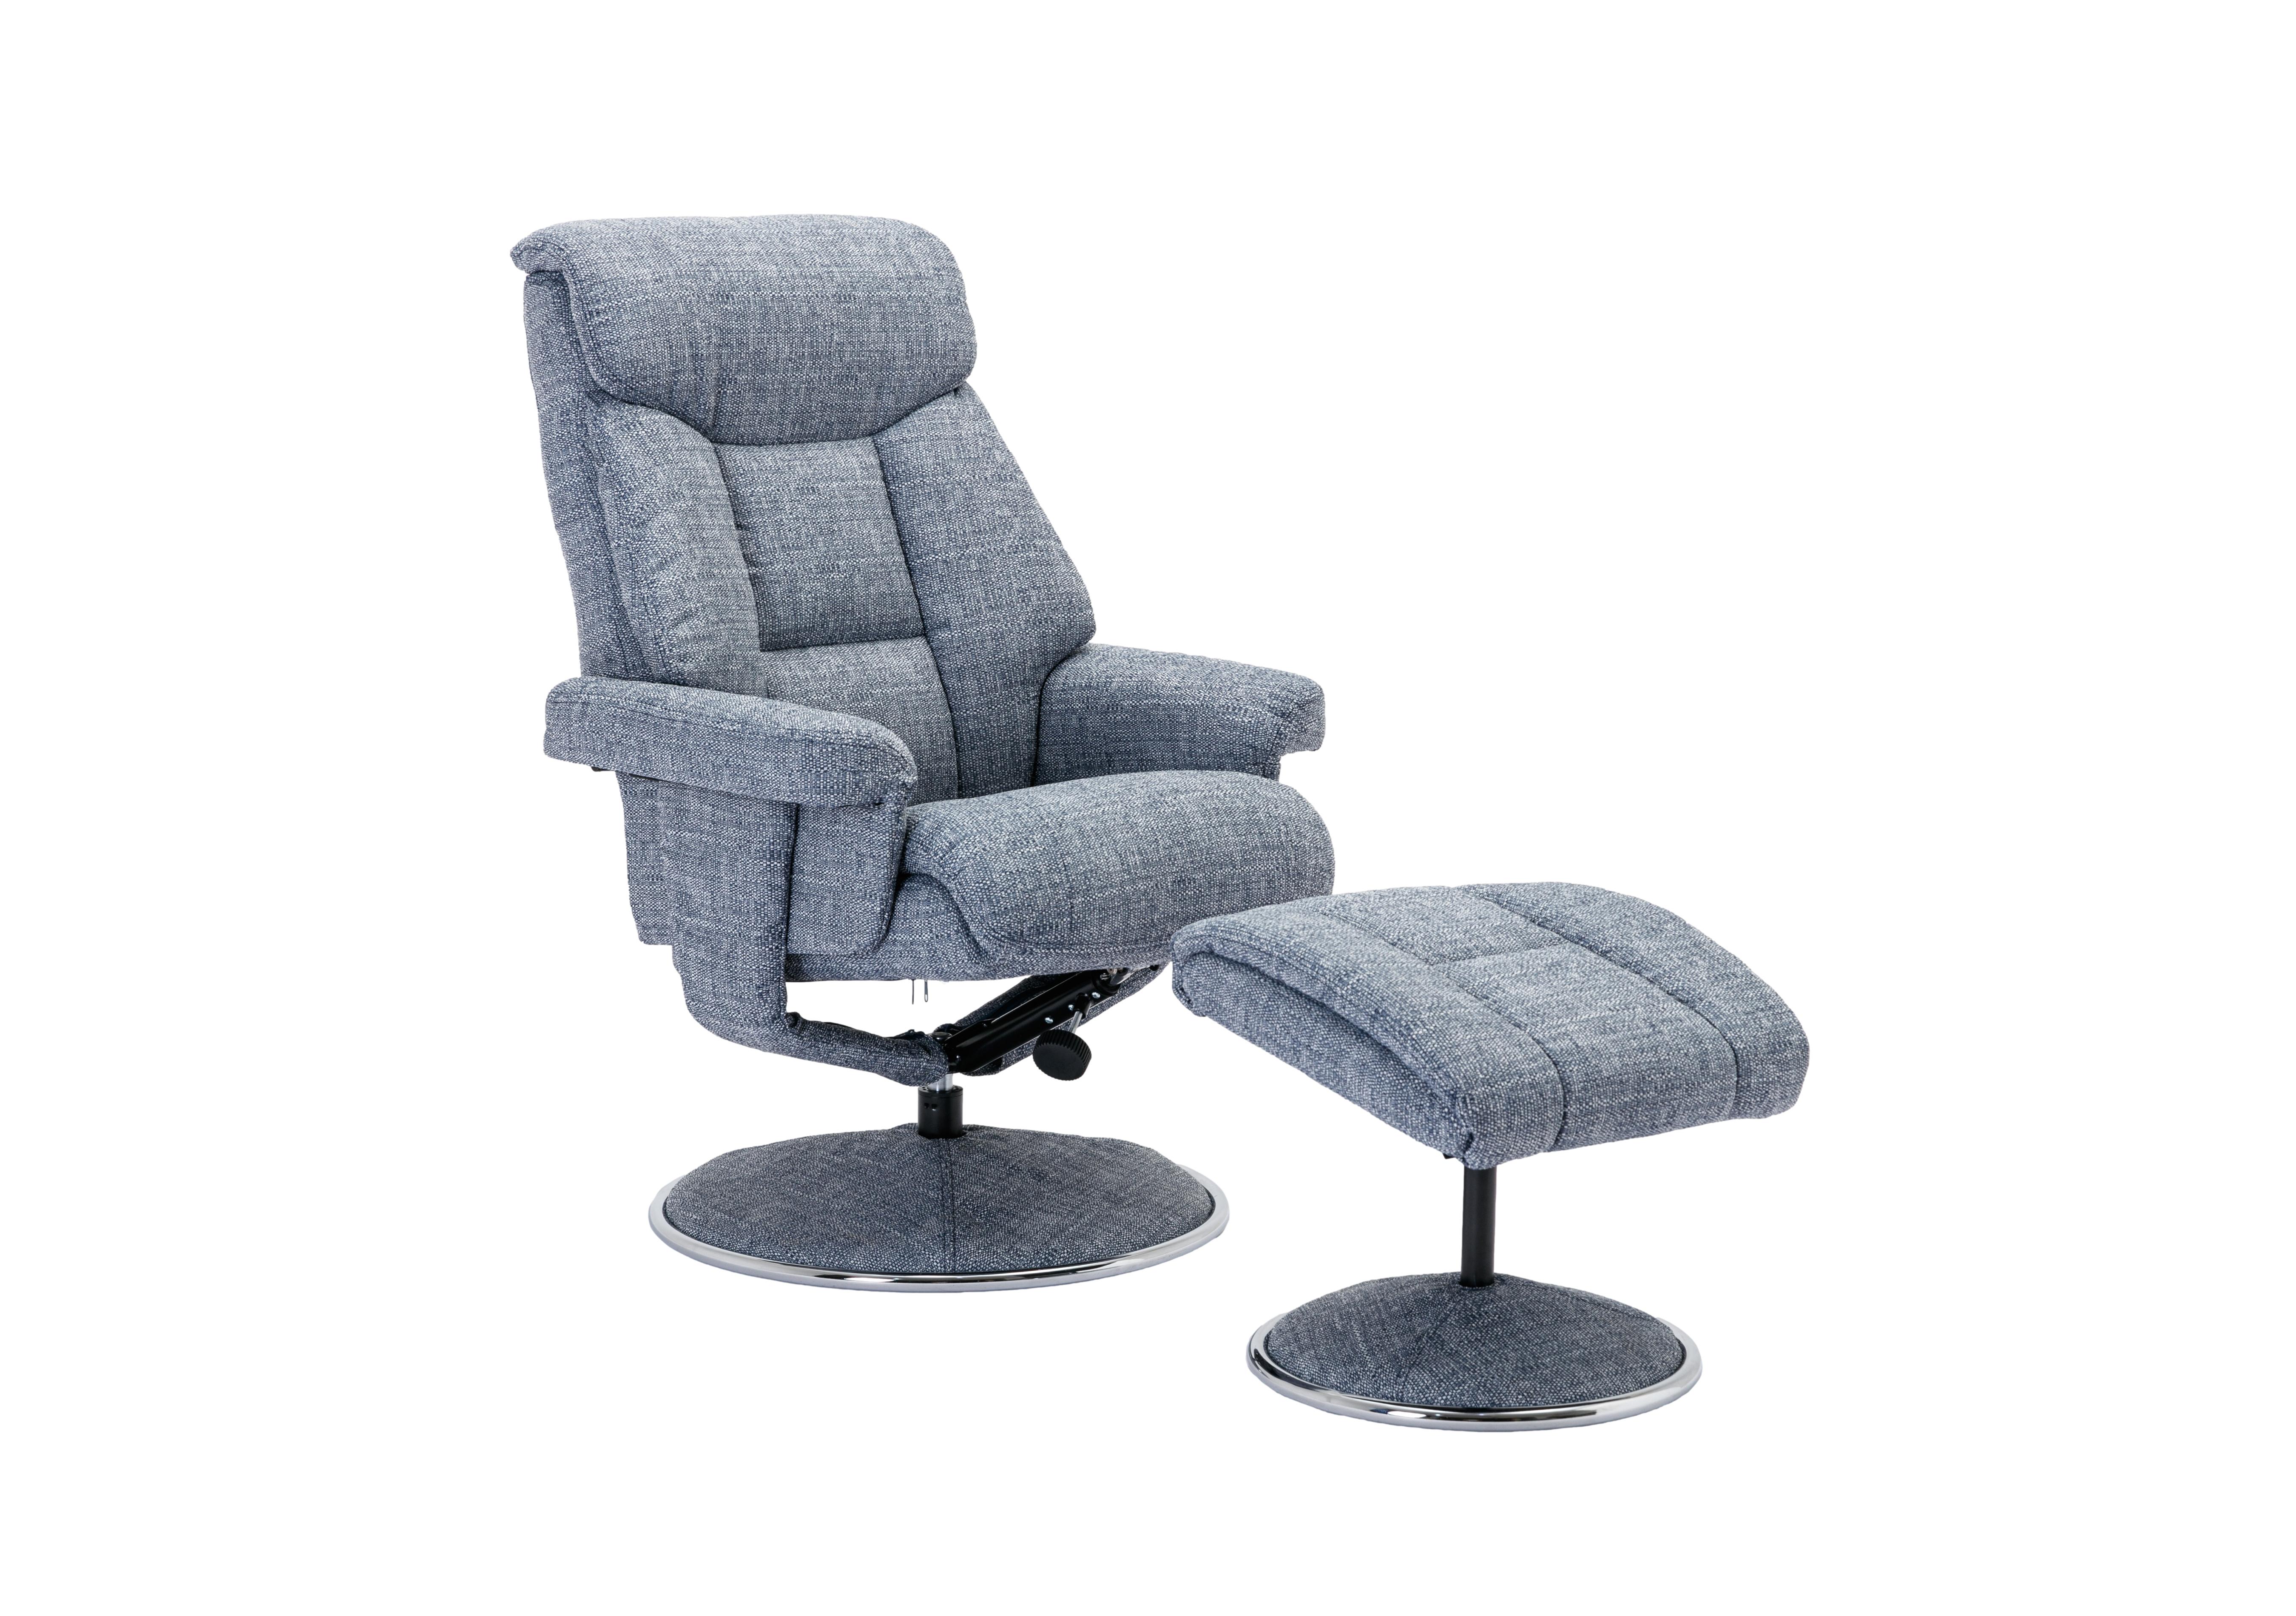 Bruges Fabric Swivel Chair and Footstool in Lisbon Marine on Furniture Village